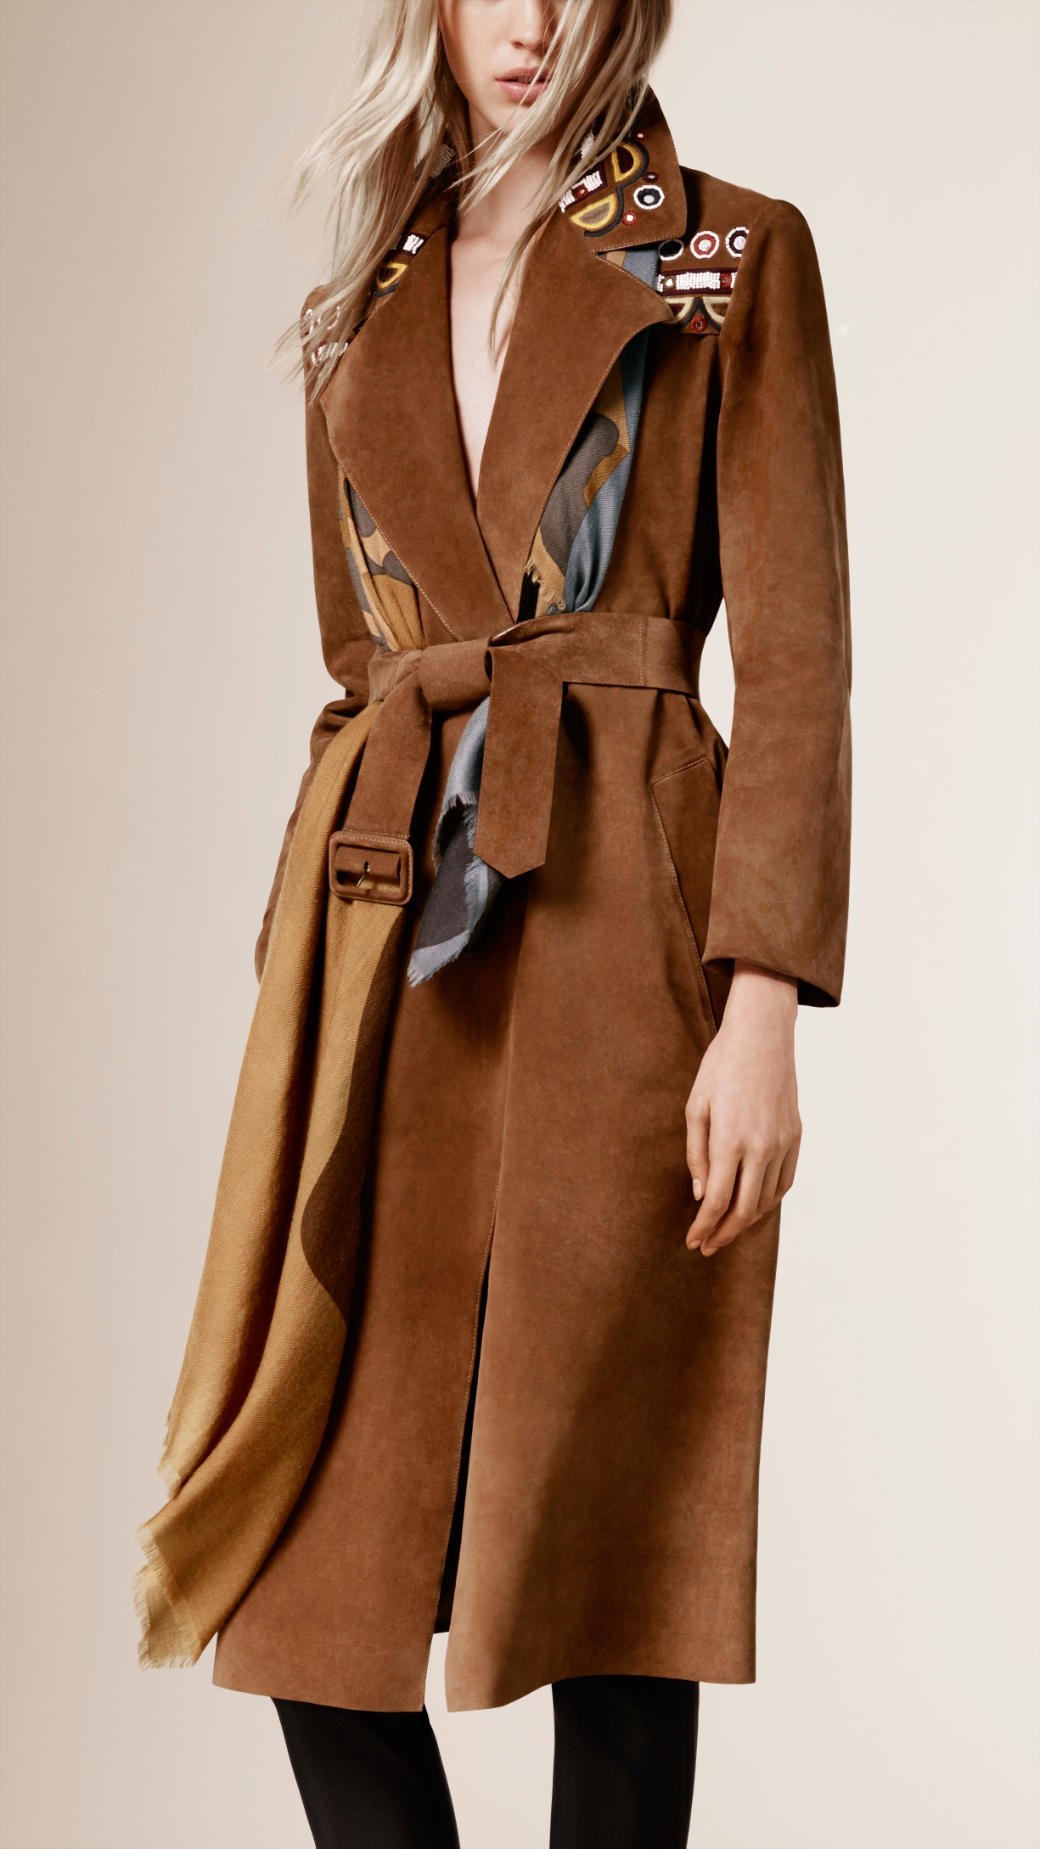 Burberry Embroidered Suede Trench Coat in Brown | Lyst